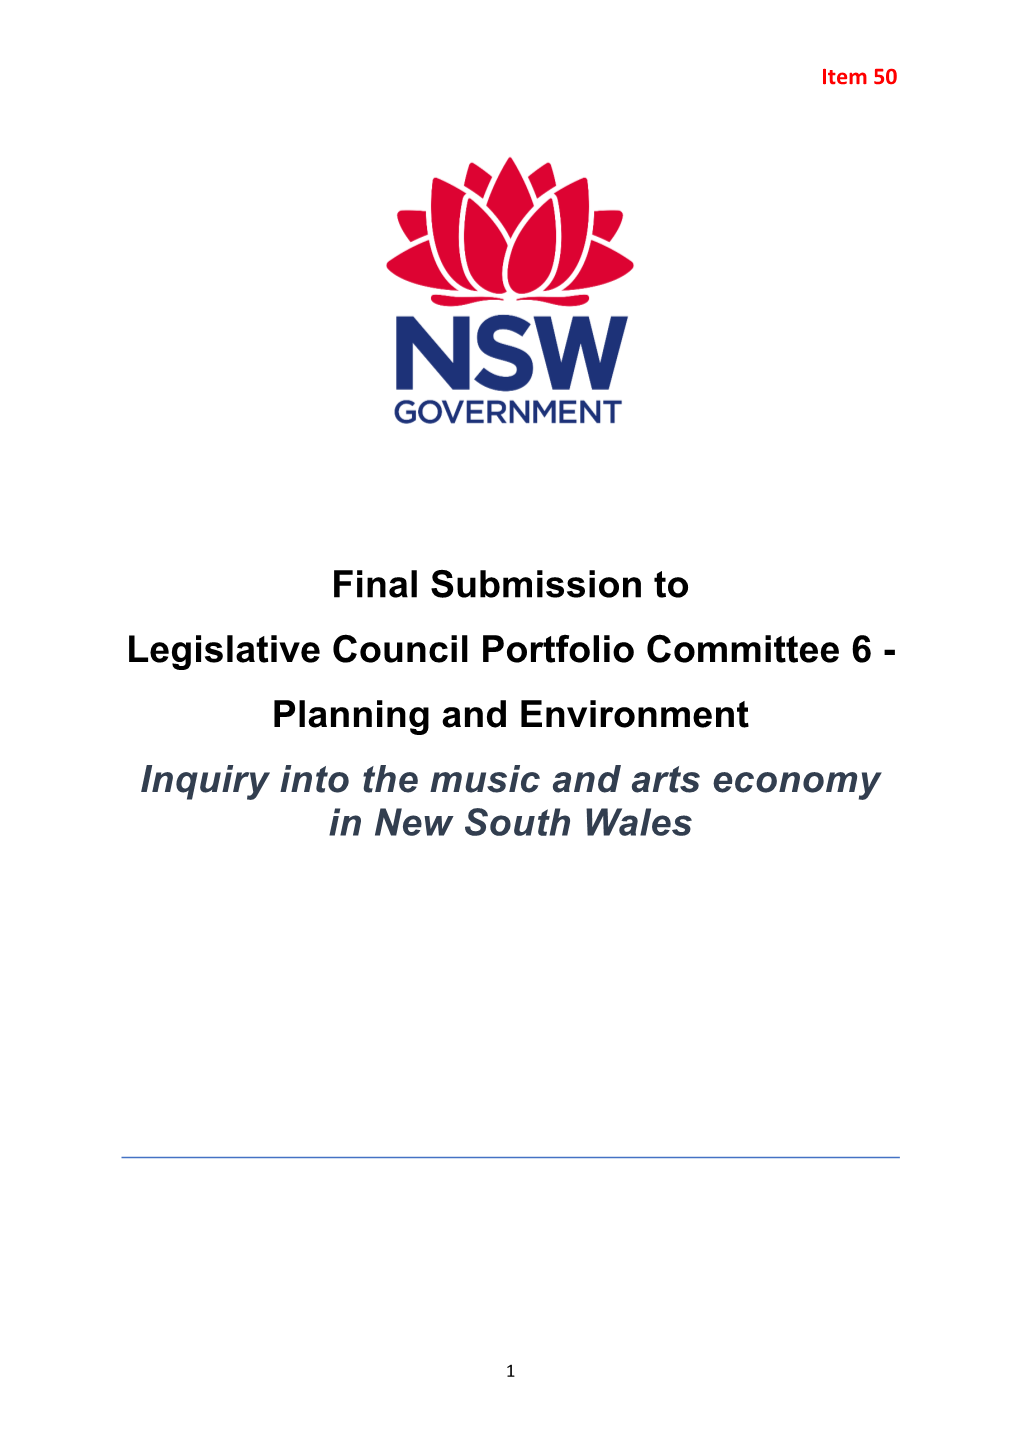 Planning and Environment Inquiry Into the Music and Arts Economy in New South Wales